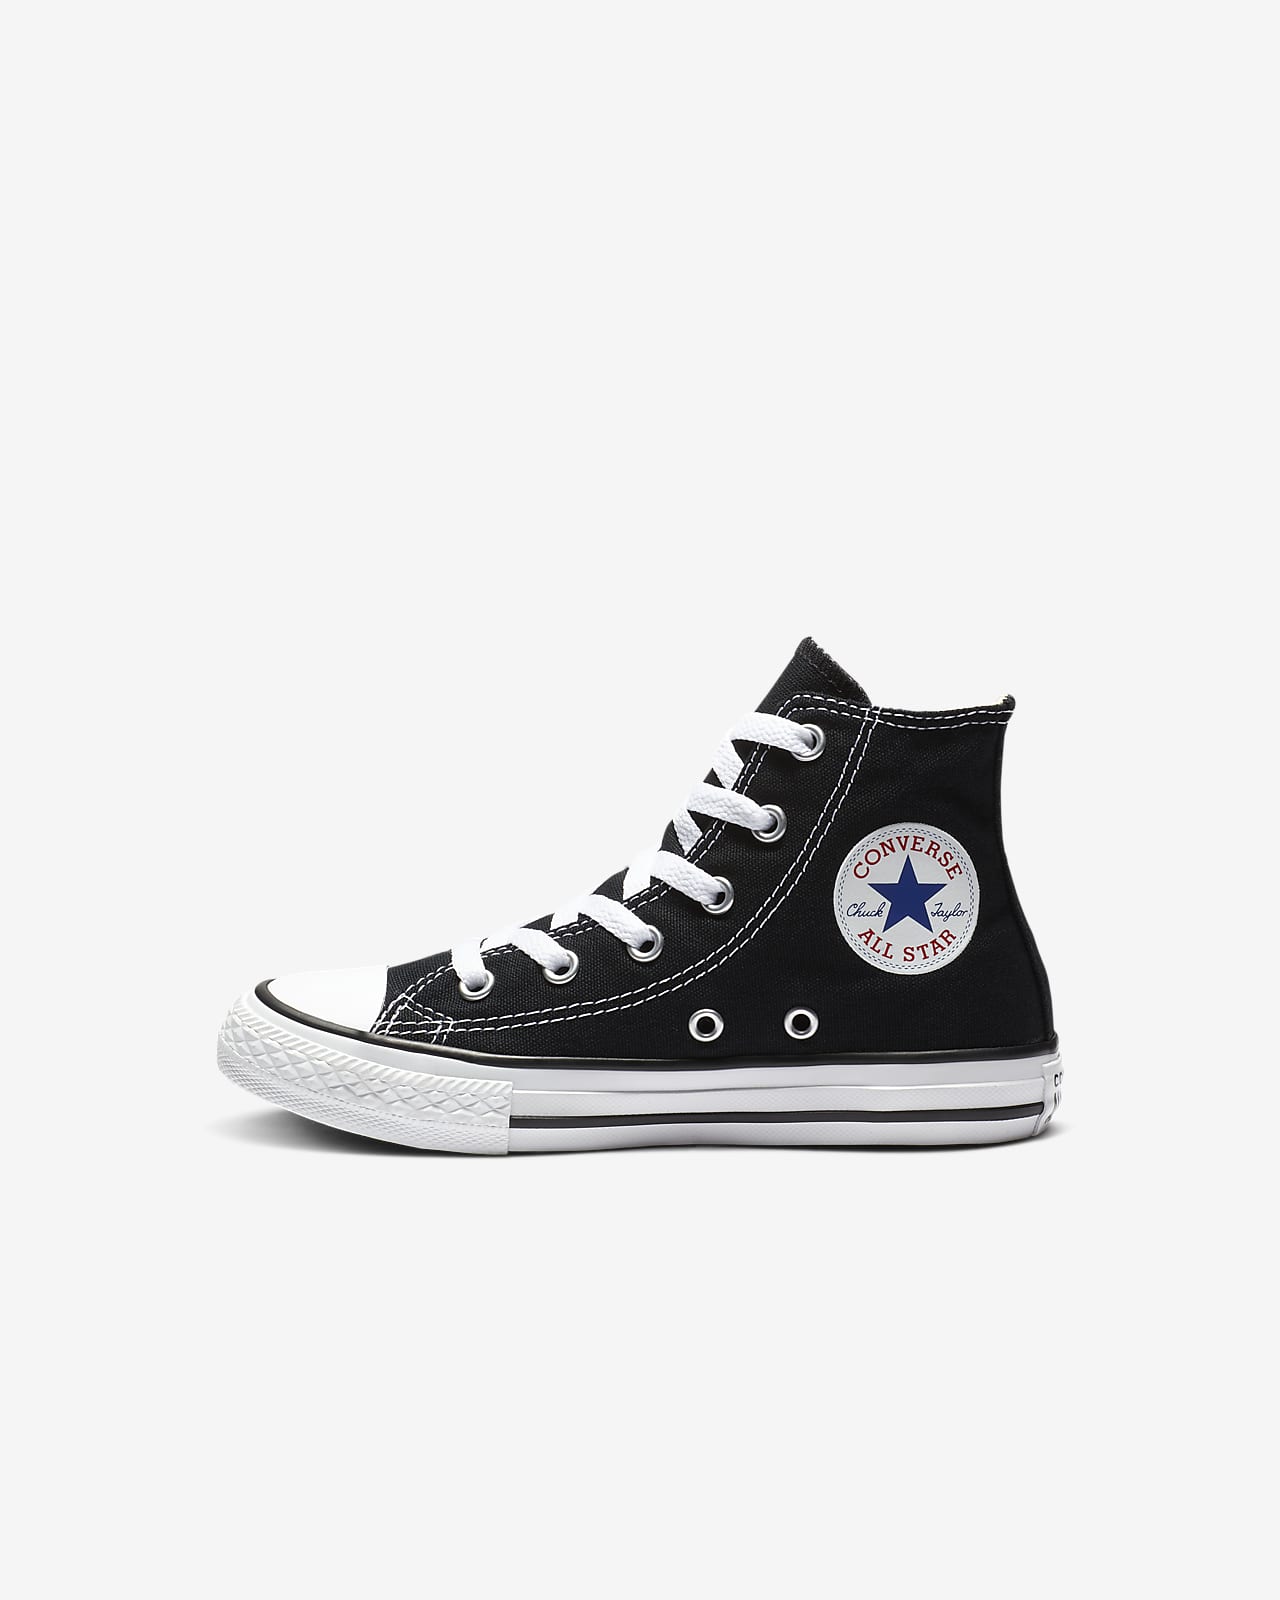 Converse Chuck Taylor All Star High Top Little Kids' Shoes مات هاردي